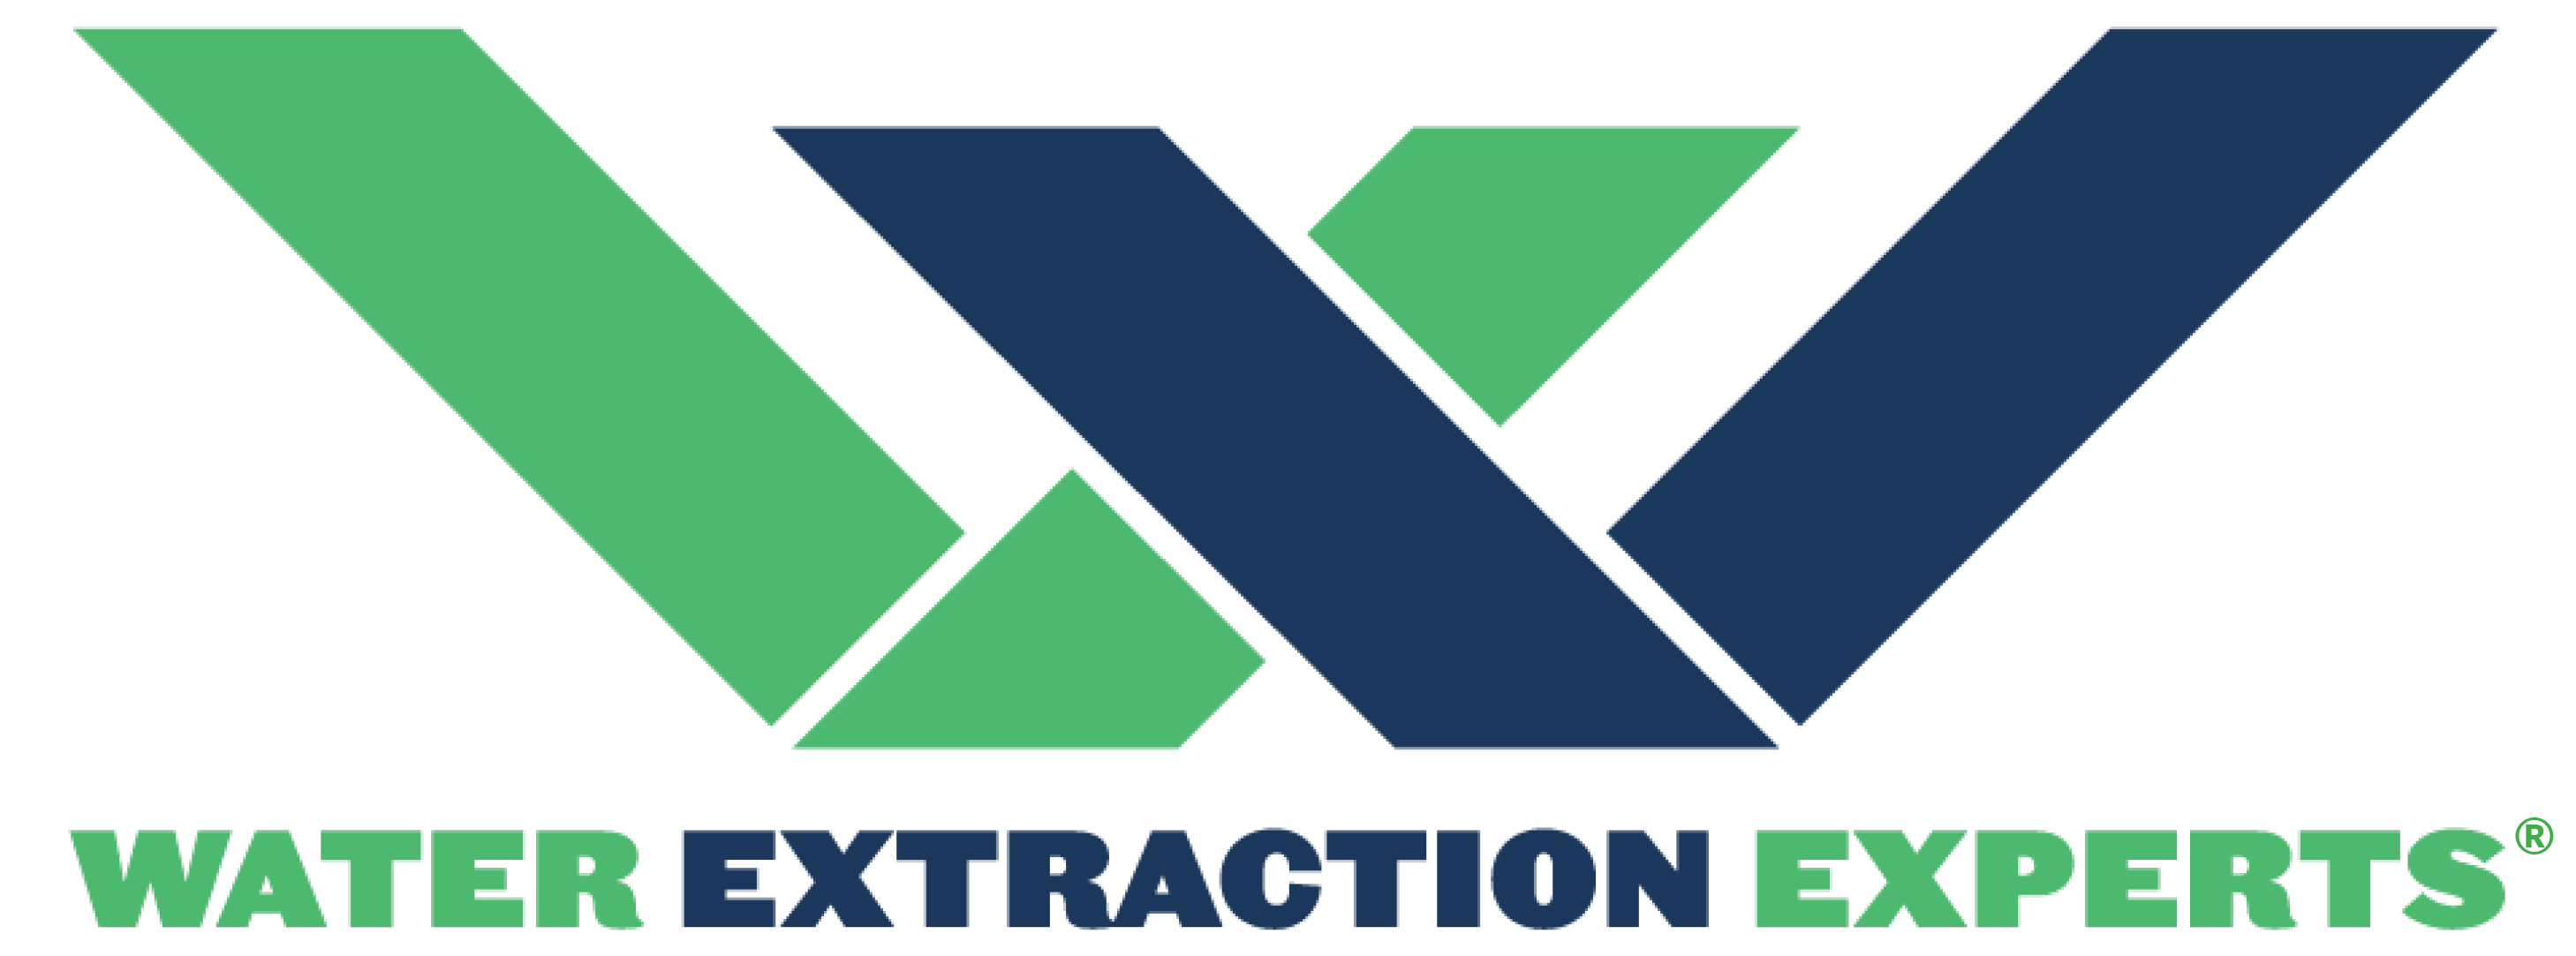 Water Extraction Experts logo